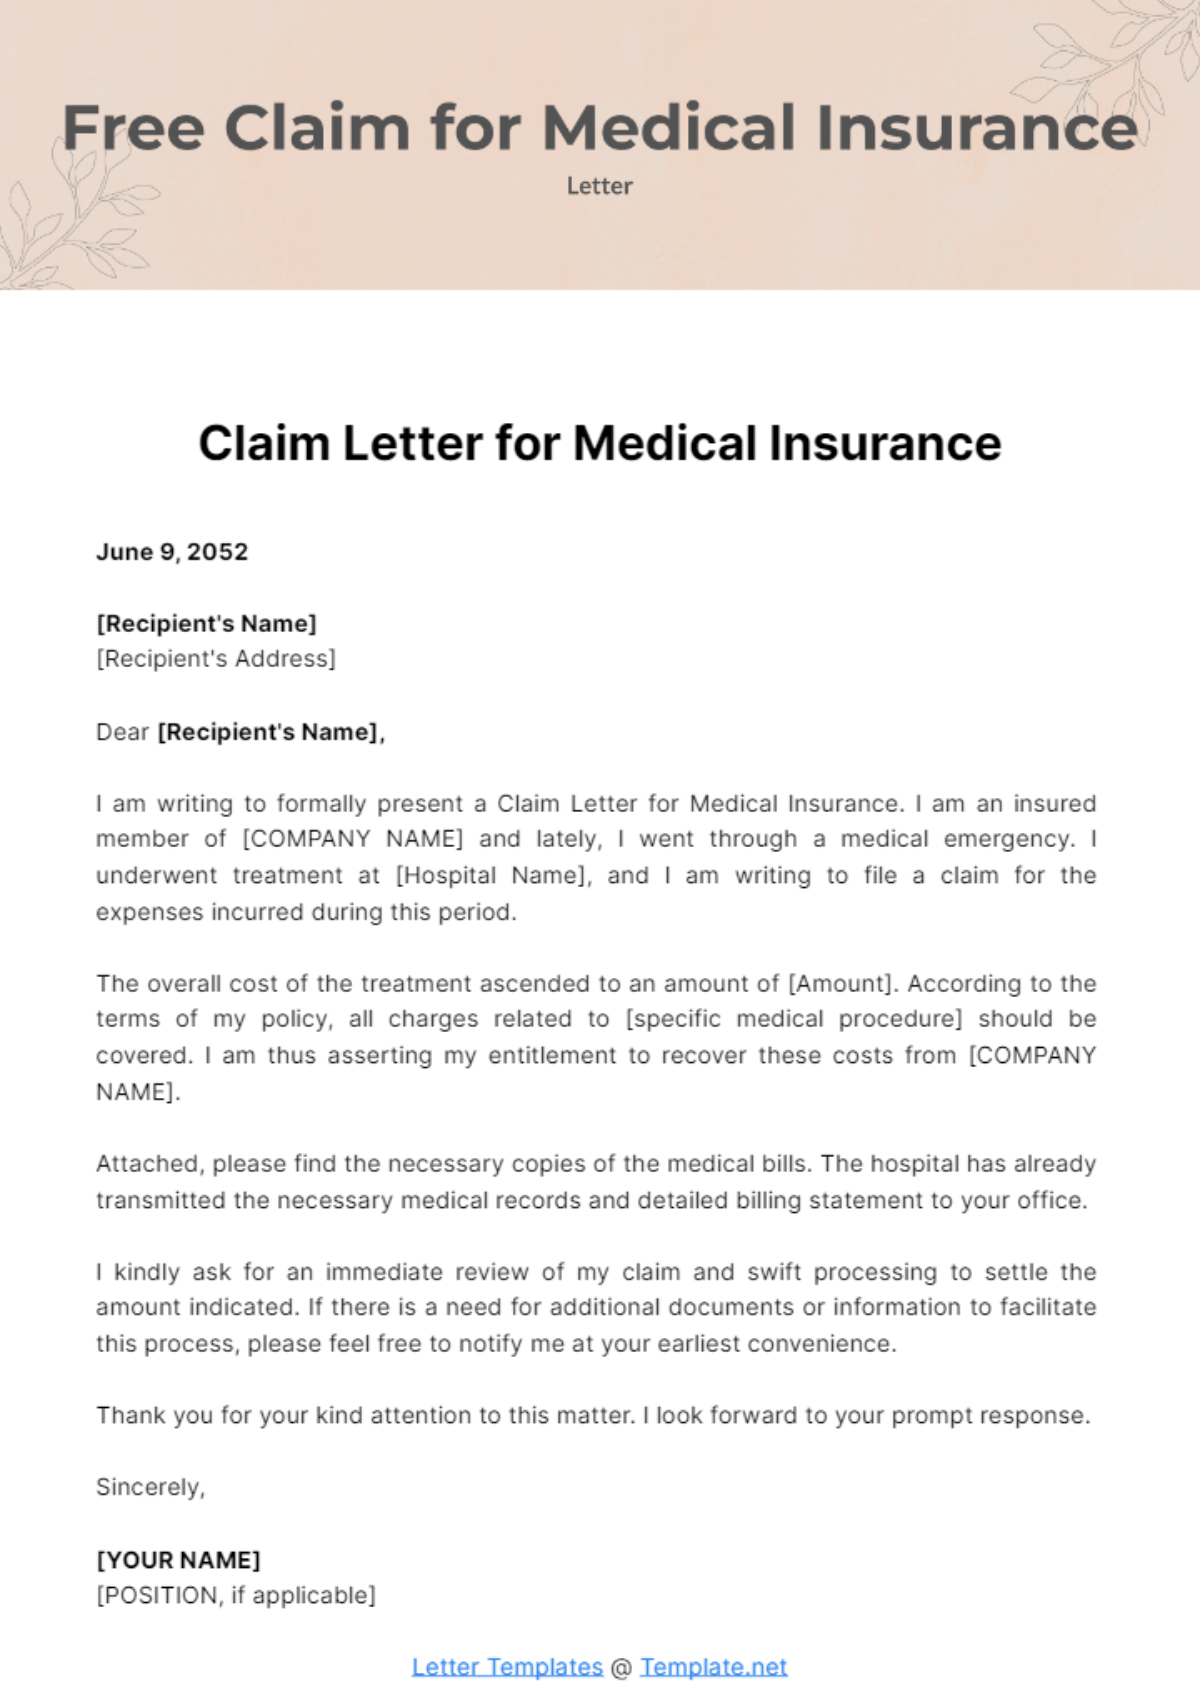 Free Claim Letter for Medical Insurance Template